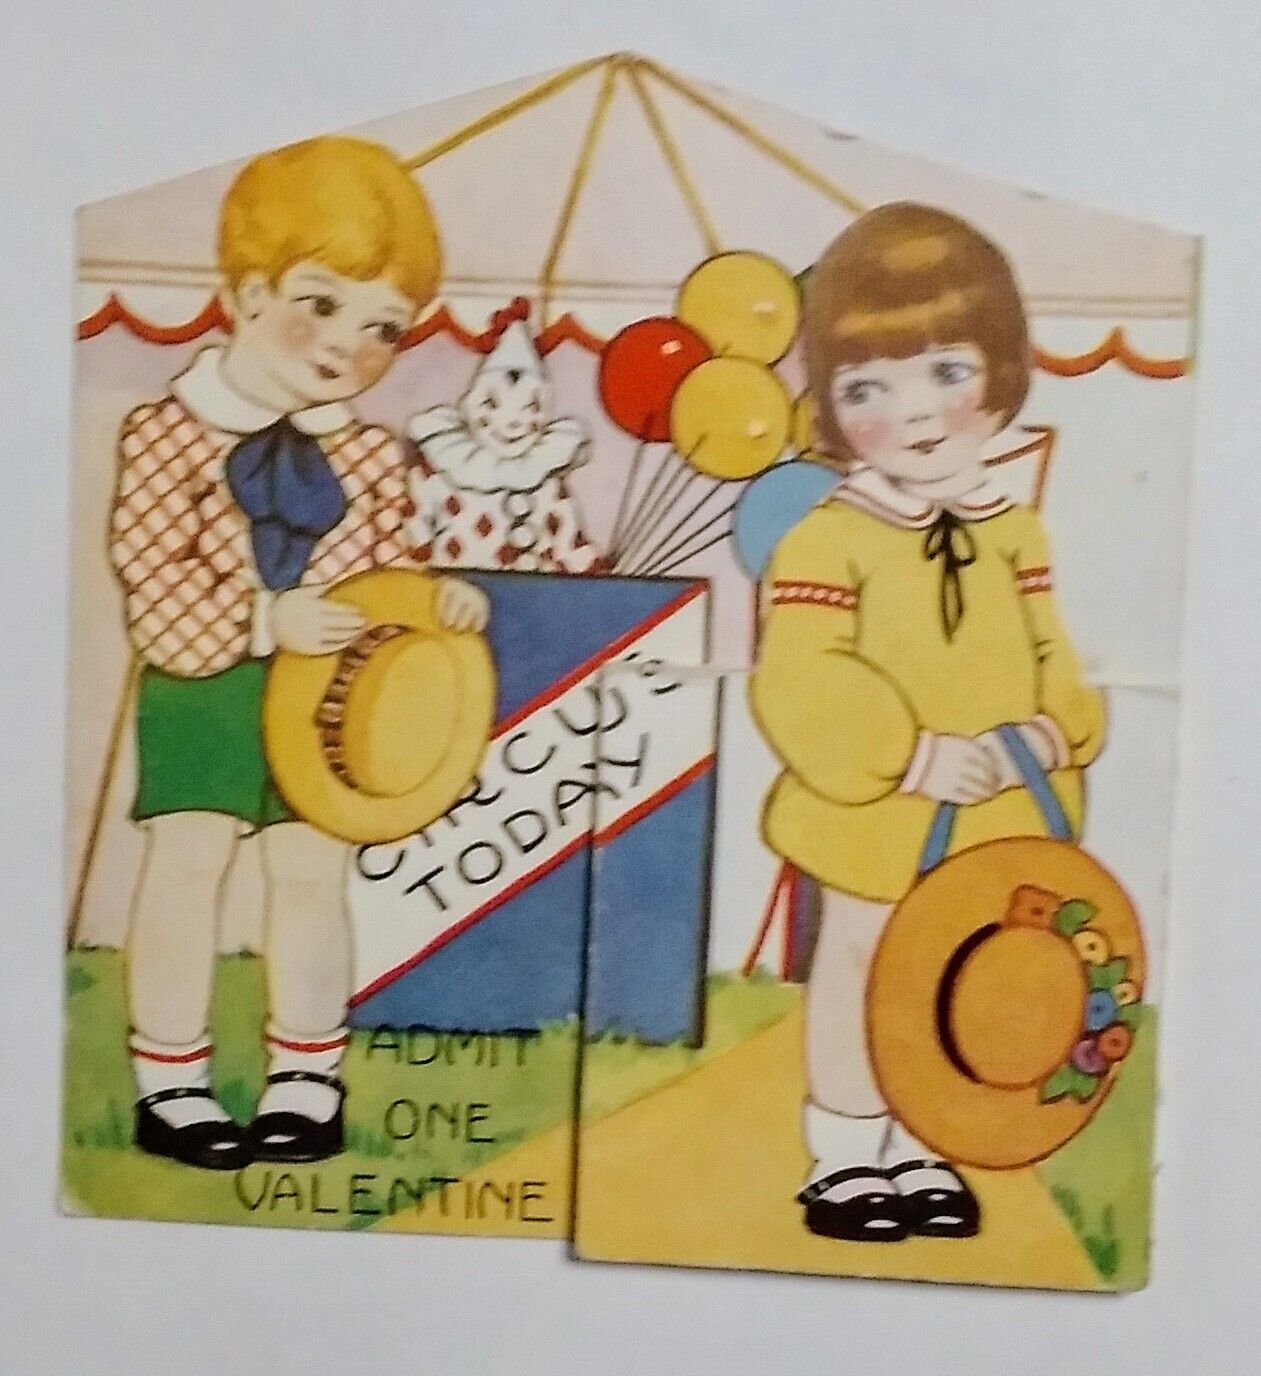 Circus Tent Valentine w/ Boy & Girl Clown Vintage 1930s Folding Stand-Up Card